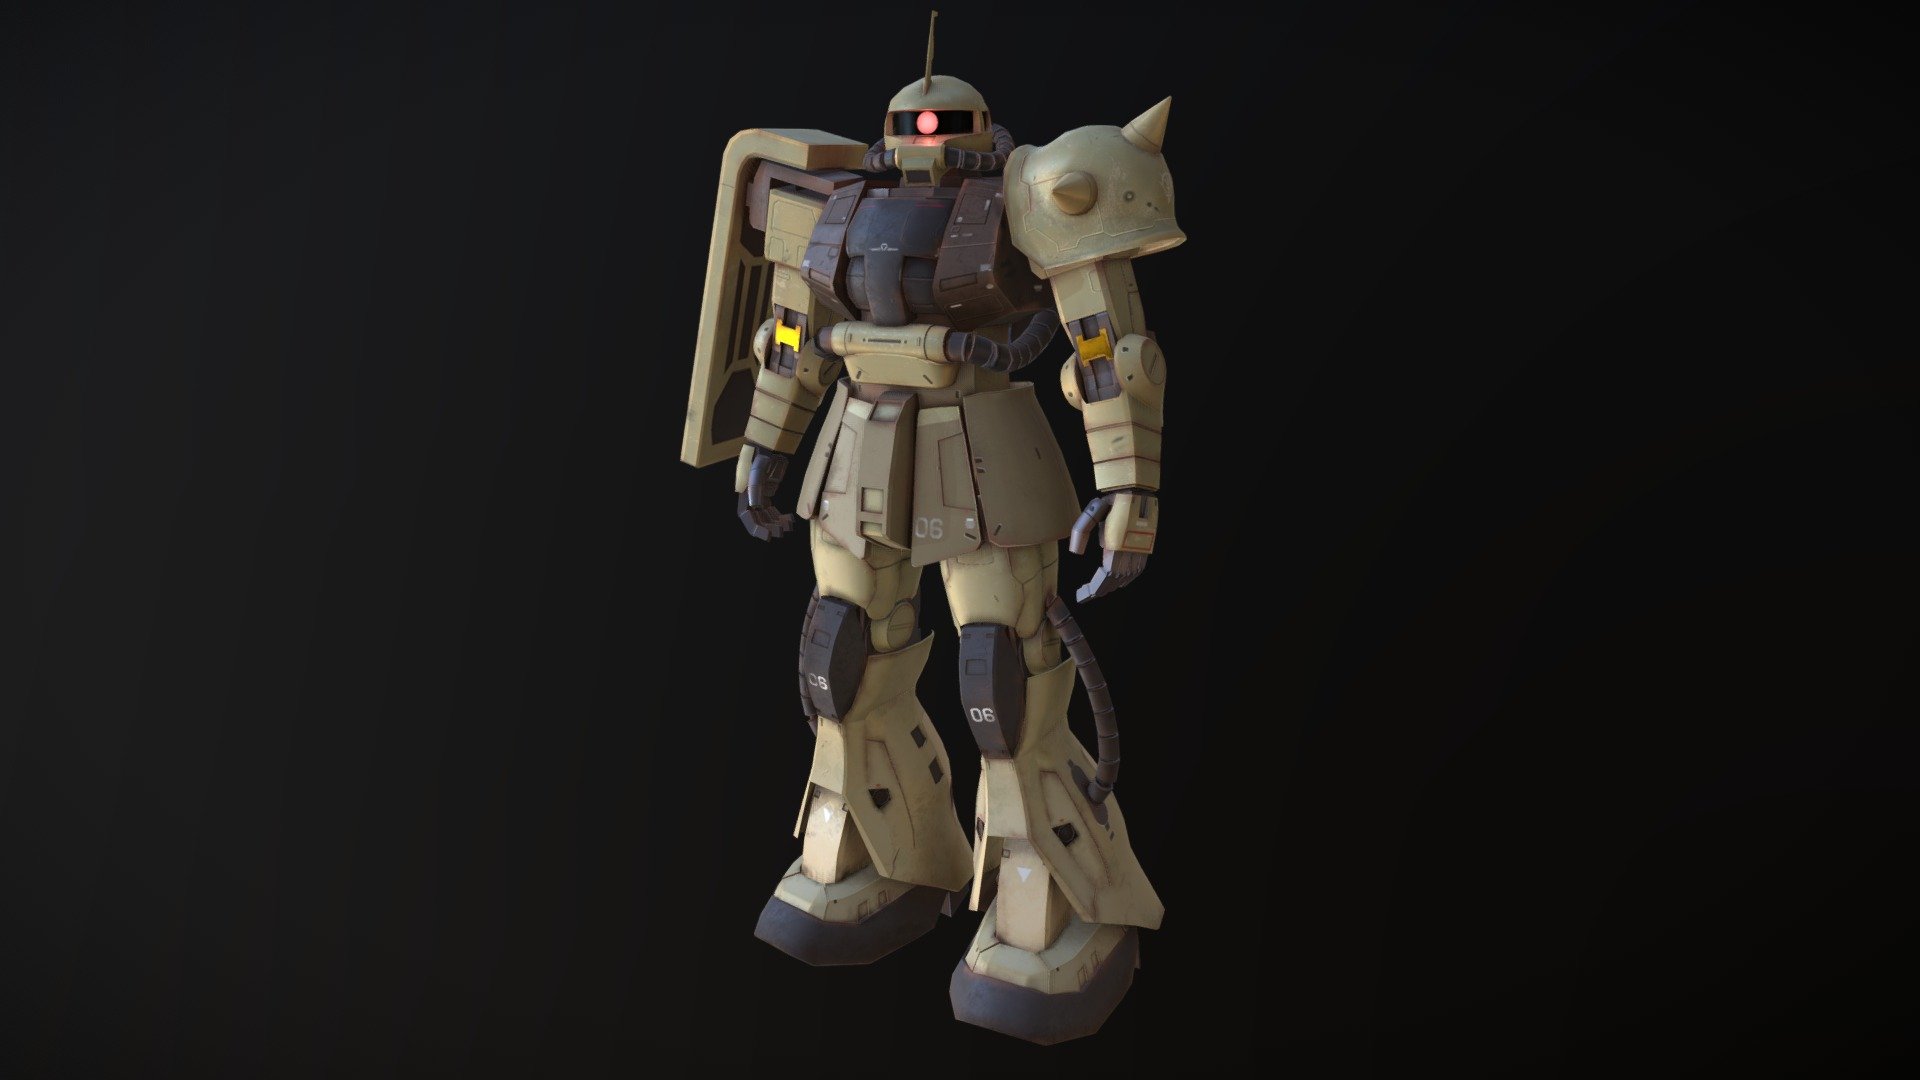 A full model of the Zaku II mecha from Mobile Suit Gundam - after about a month's work, I'm pretty happy with it! This particular colour scheme is based on the Minelayer variant. Soon enough I'll be working on alternative colour palettes and getting him rigged so he can be animated - keep an eye out for more! - MS-06F Zaku II - 3D model by teeteegone 3d model